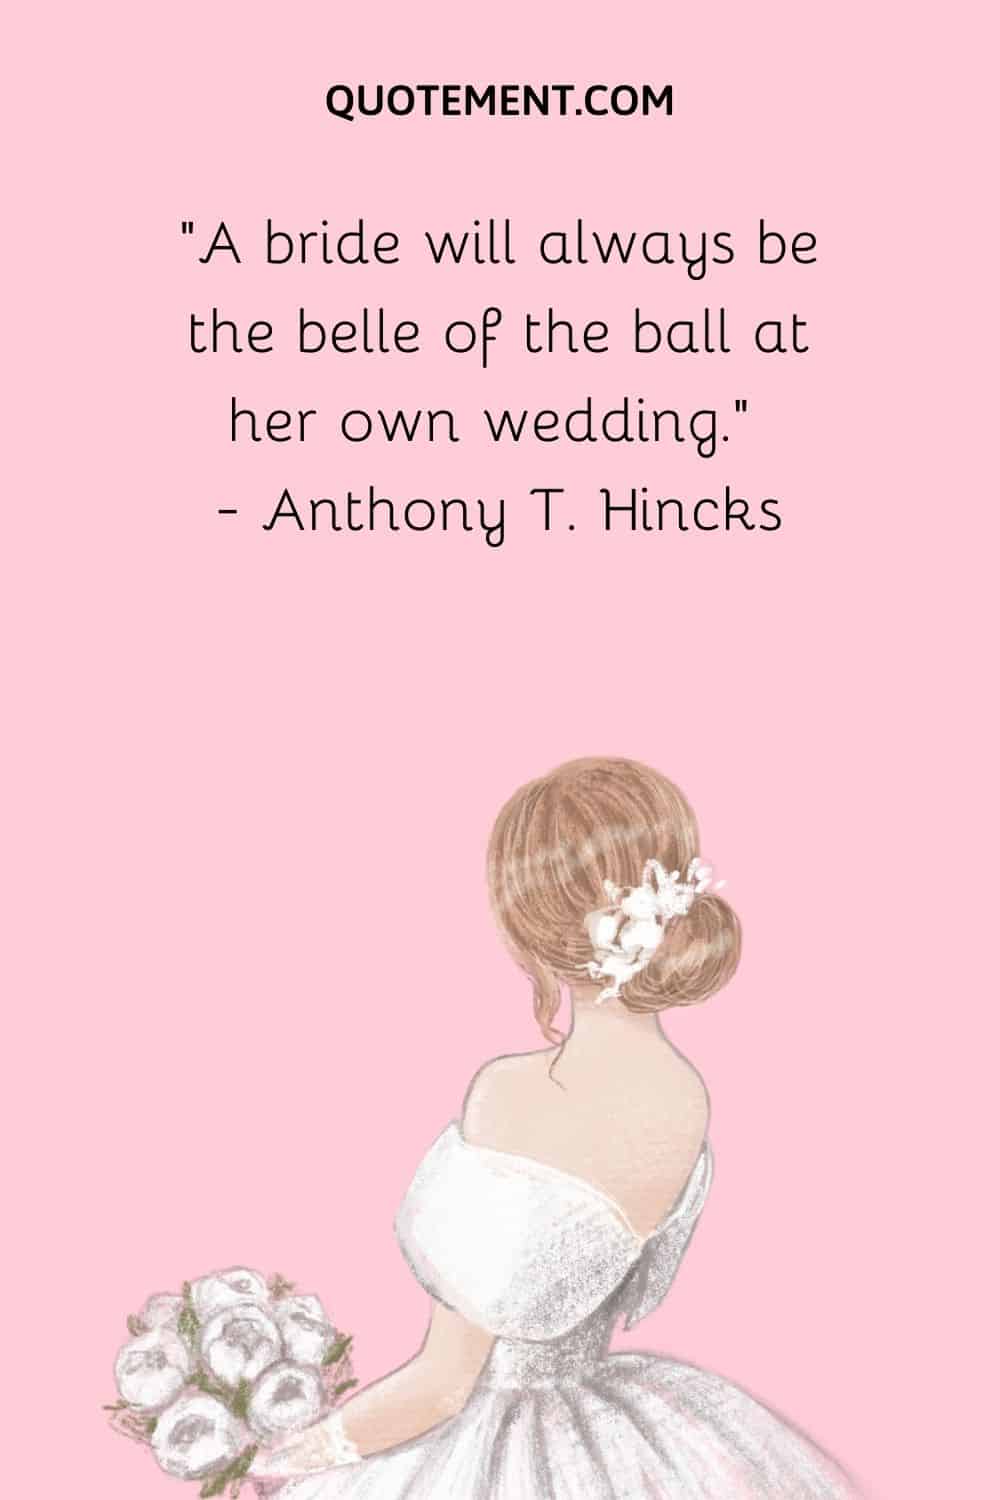 A bride will always be the belle of the ball at her own wedding. — Anthony T. Hincks